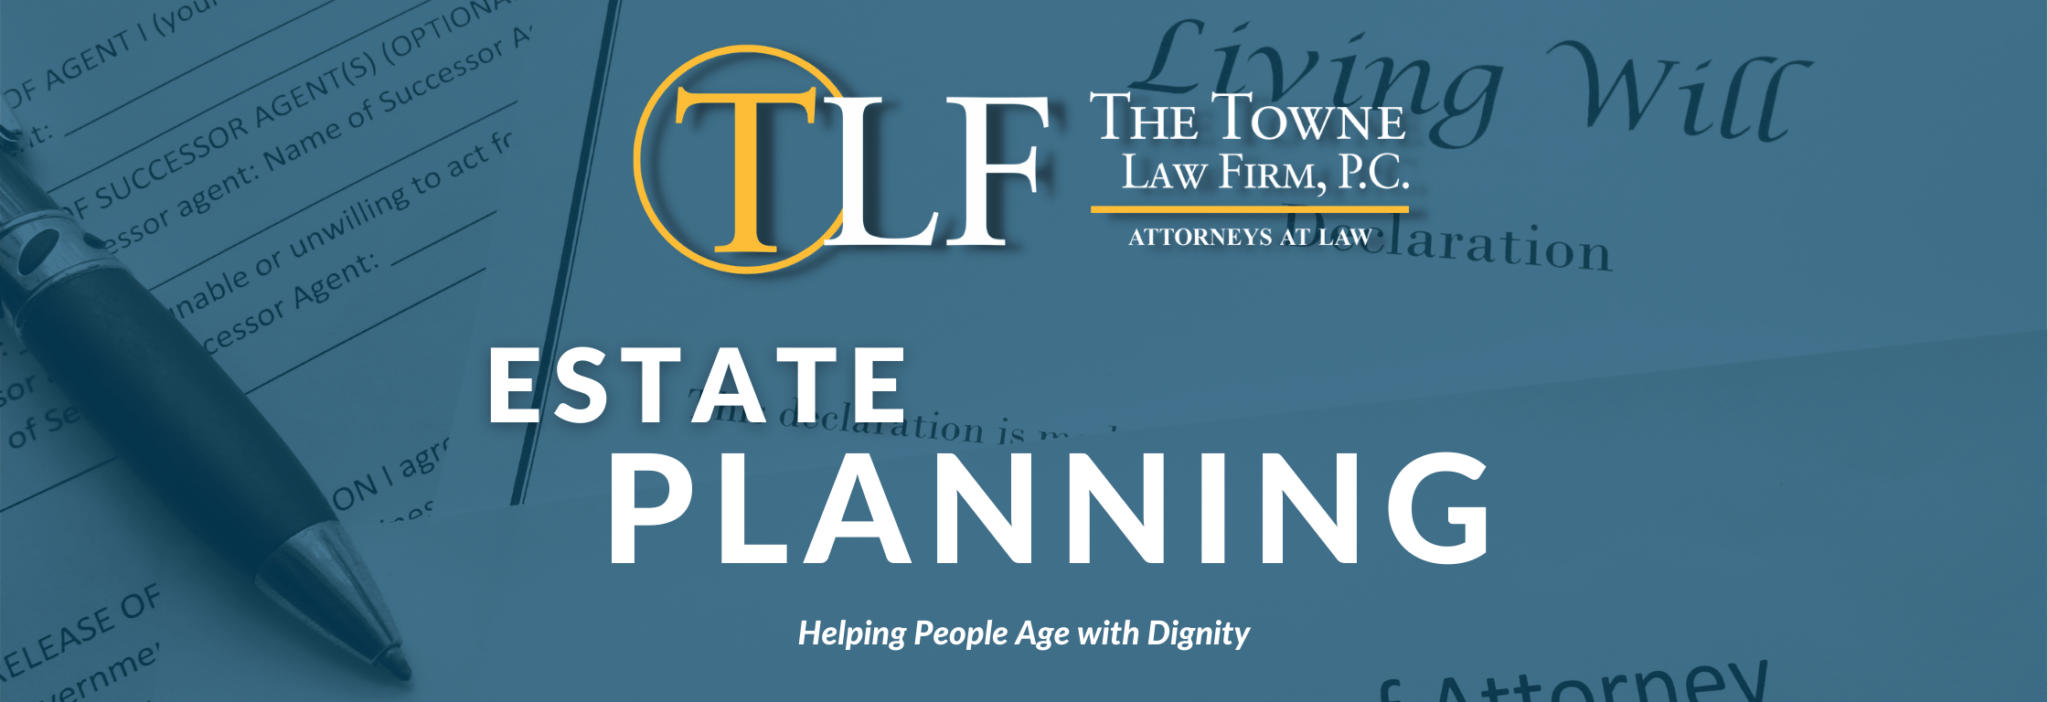 The Towne Law Firm Estate Planning Blog Header Image with a pen and paper for a living will